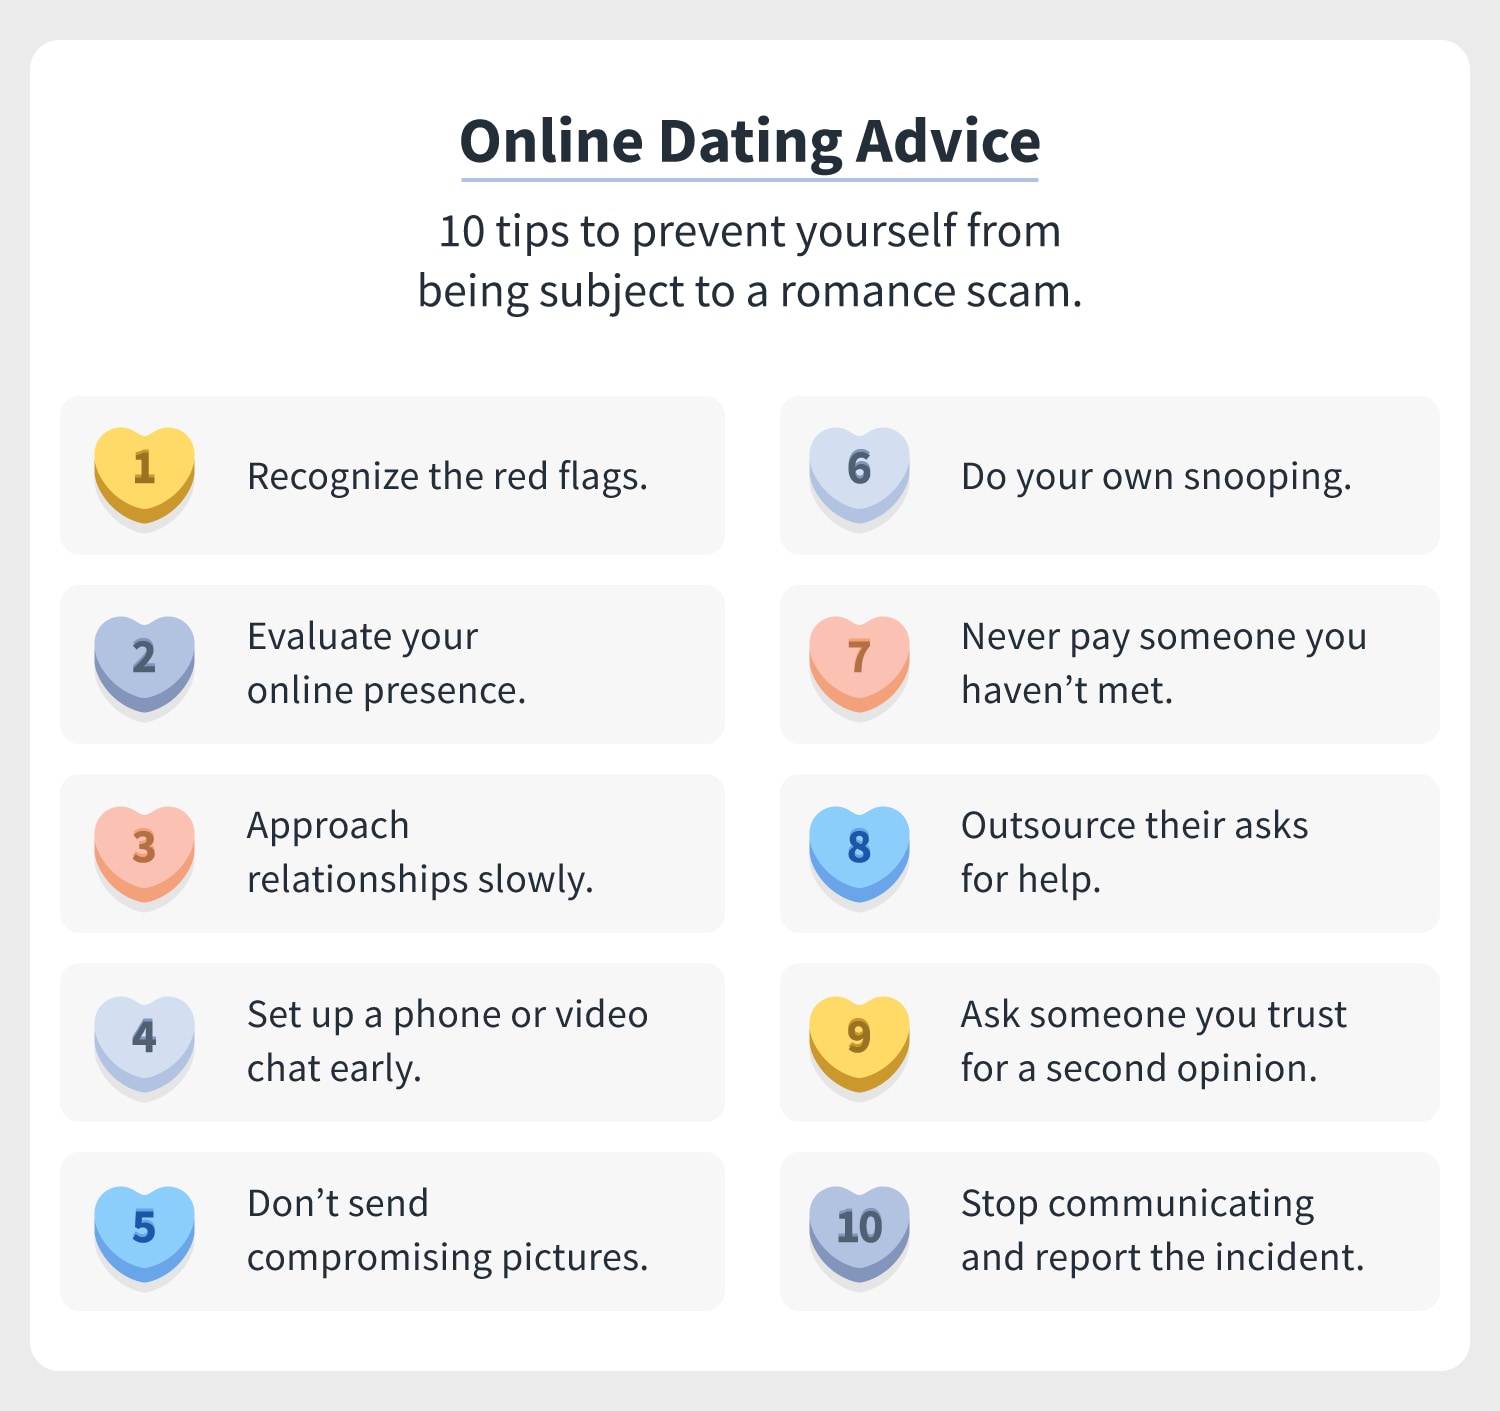 All dating sites are scams